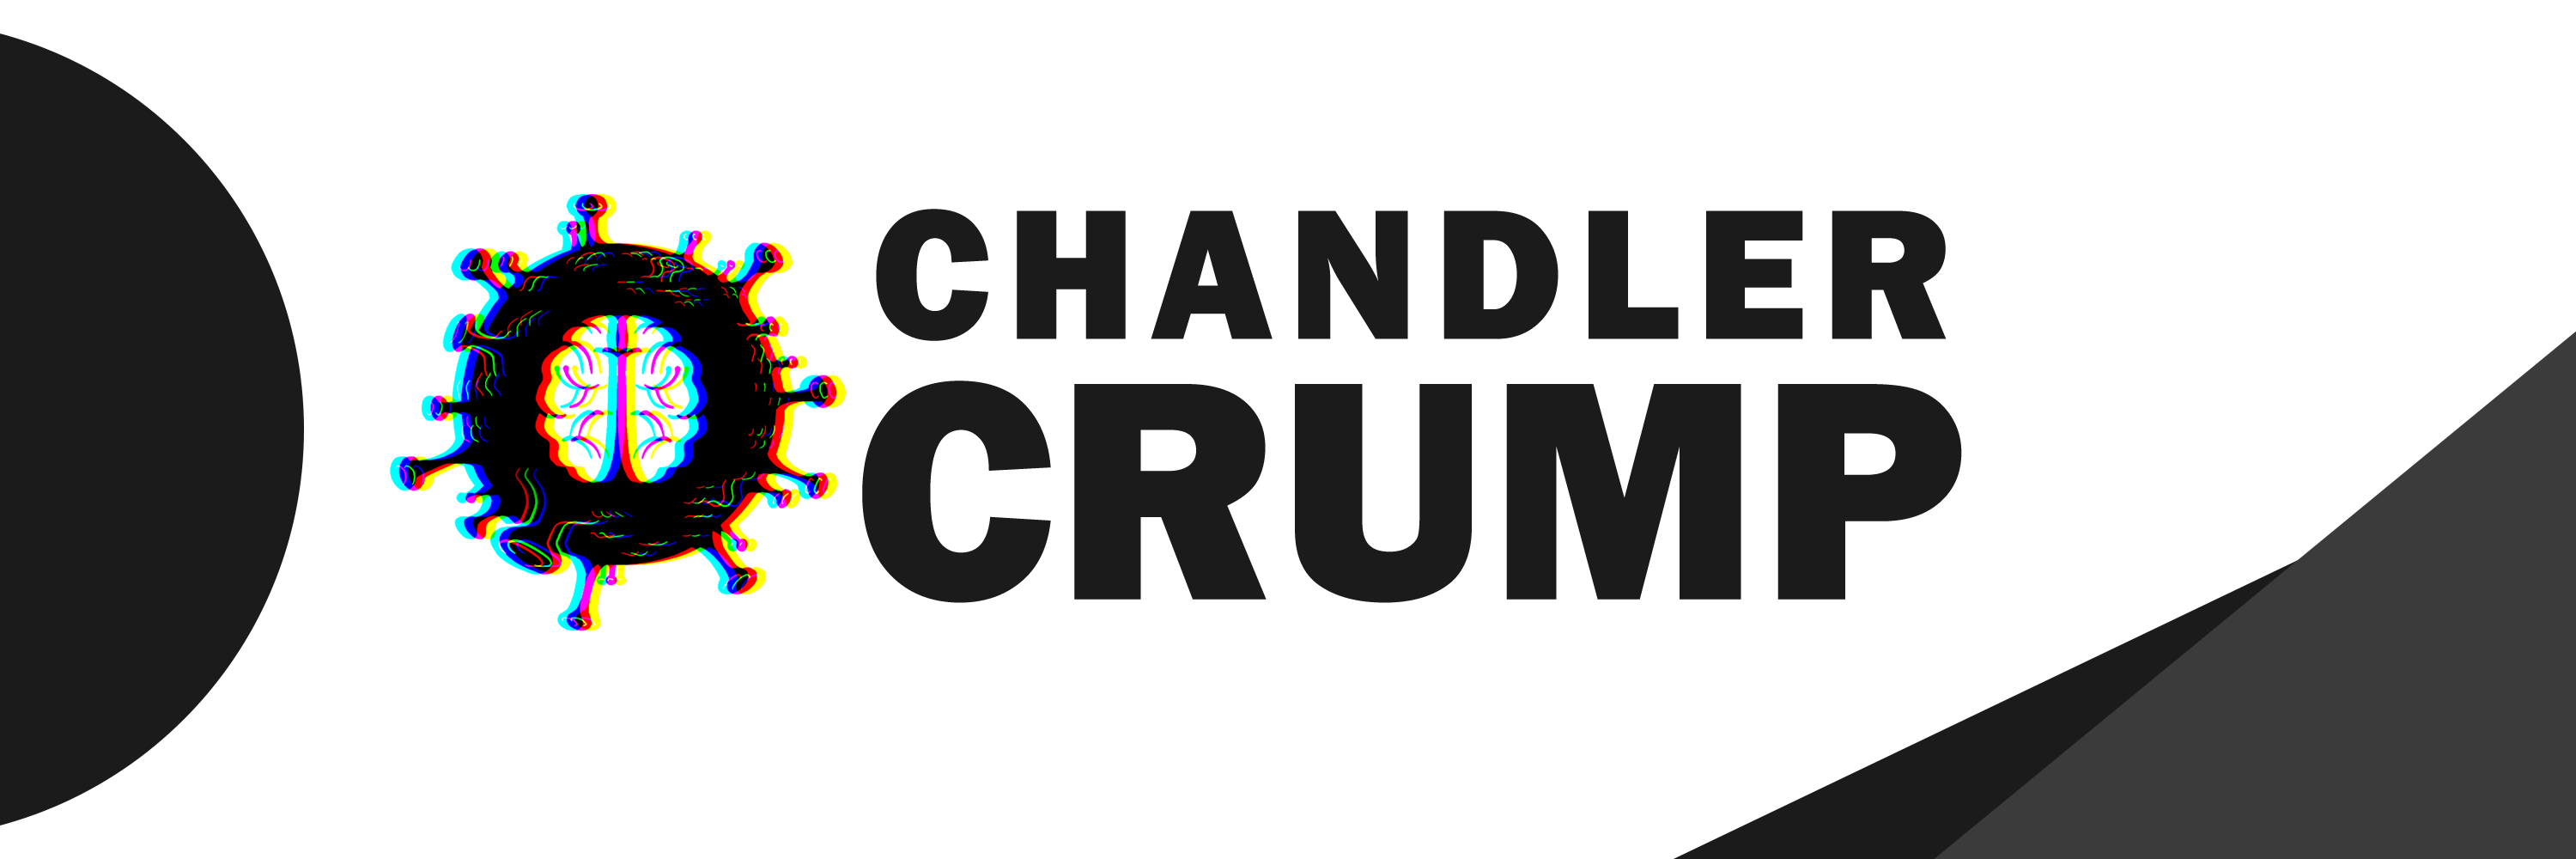 Support Chandler's Work | Chandler Crump (Powered by Donorbox)